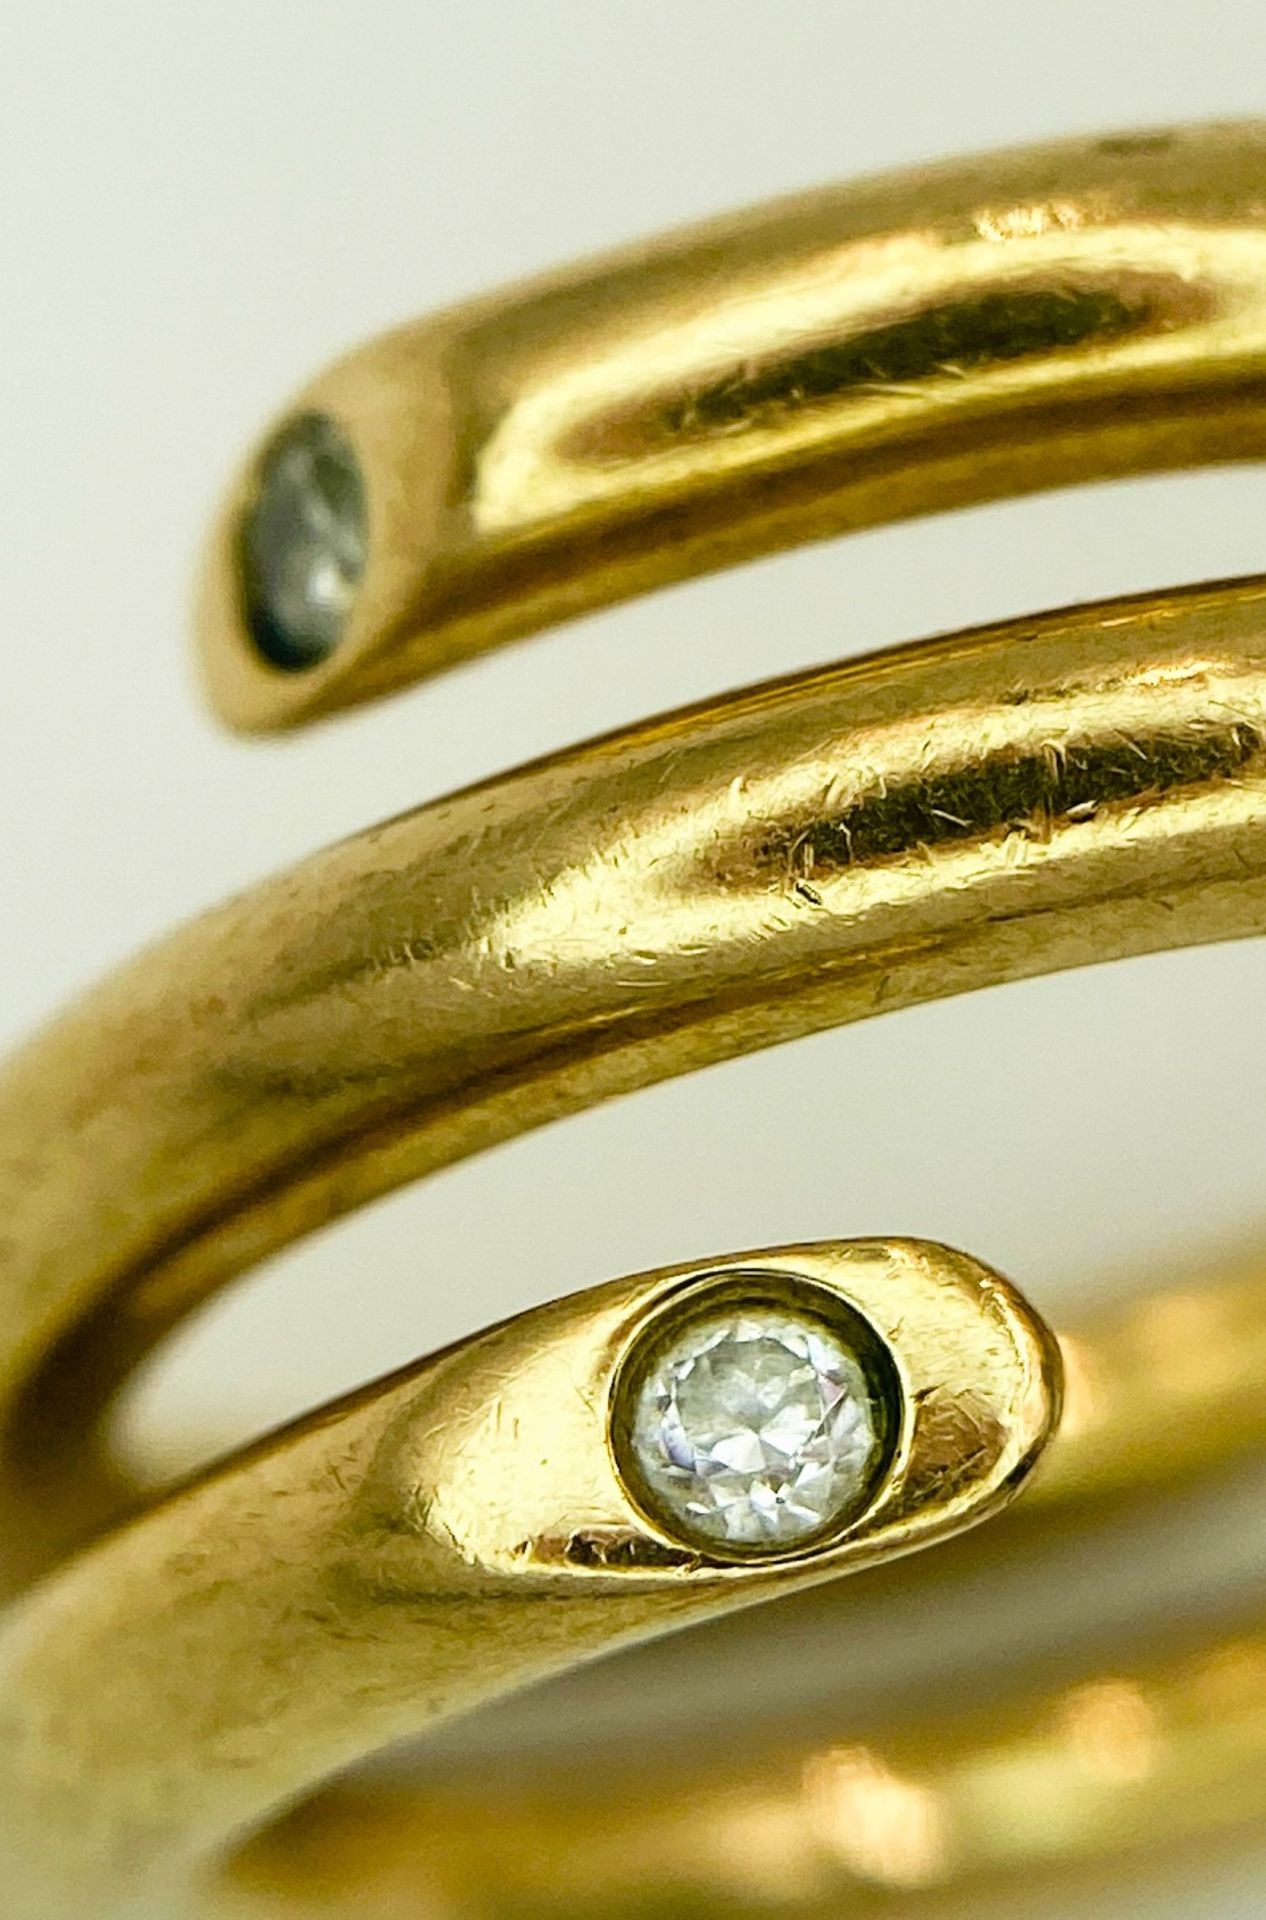 A 9K YELLOW GOLD, SERPENT STYLE DIAMOND BAND RING. 10G. SIZE T. - Image 5 of 6